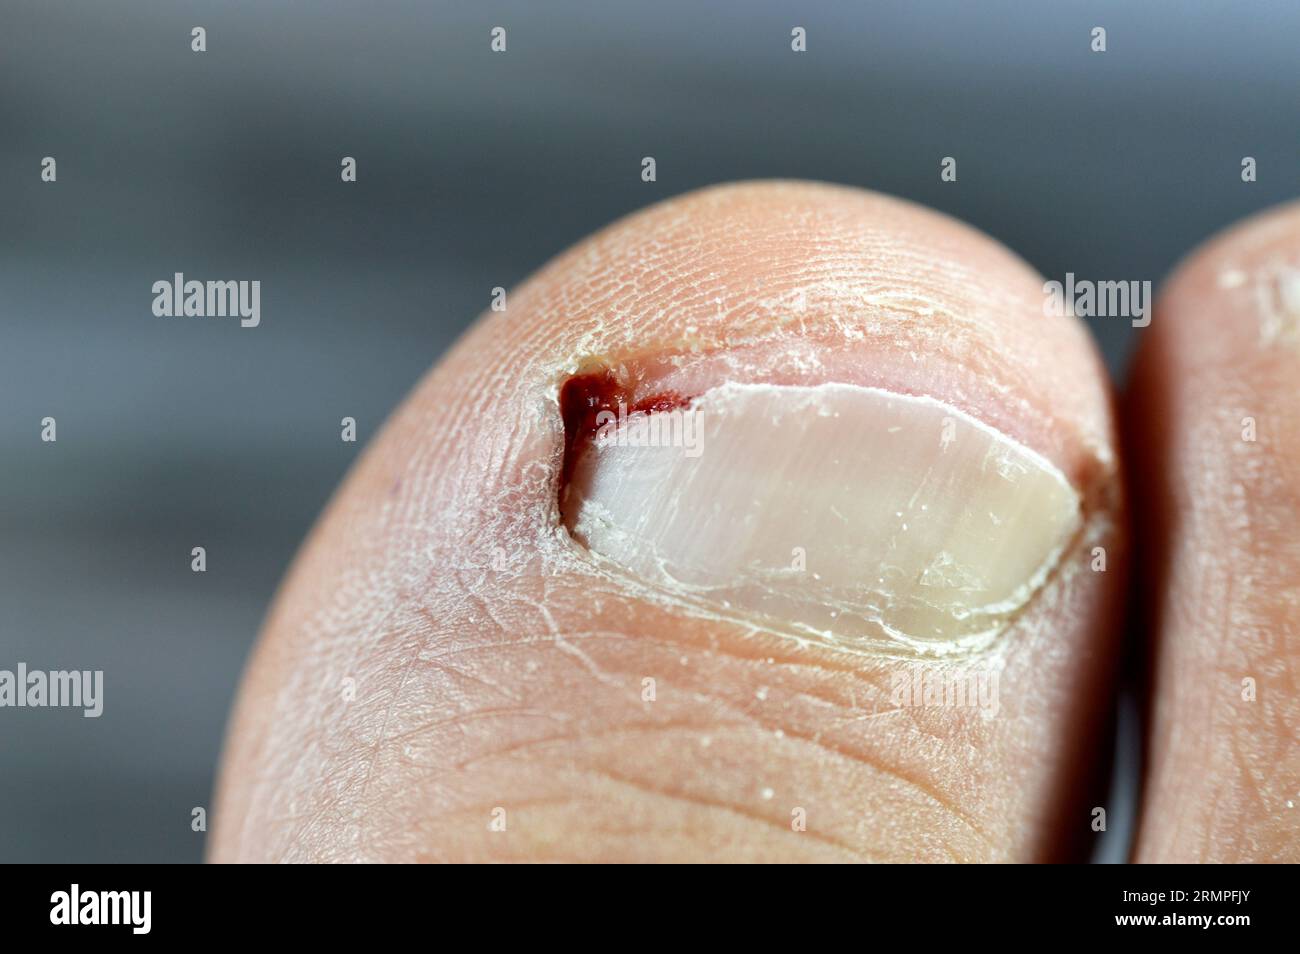 Bleeding of the big toe of the right foot, insult of the foot toe resulting in a bleeding wound that needs care and bandage, blood on toenail that nee Stock Photo